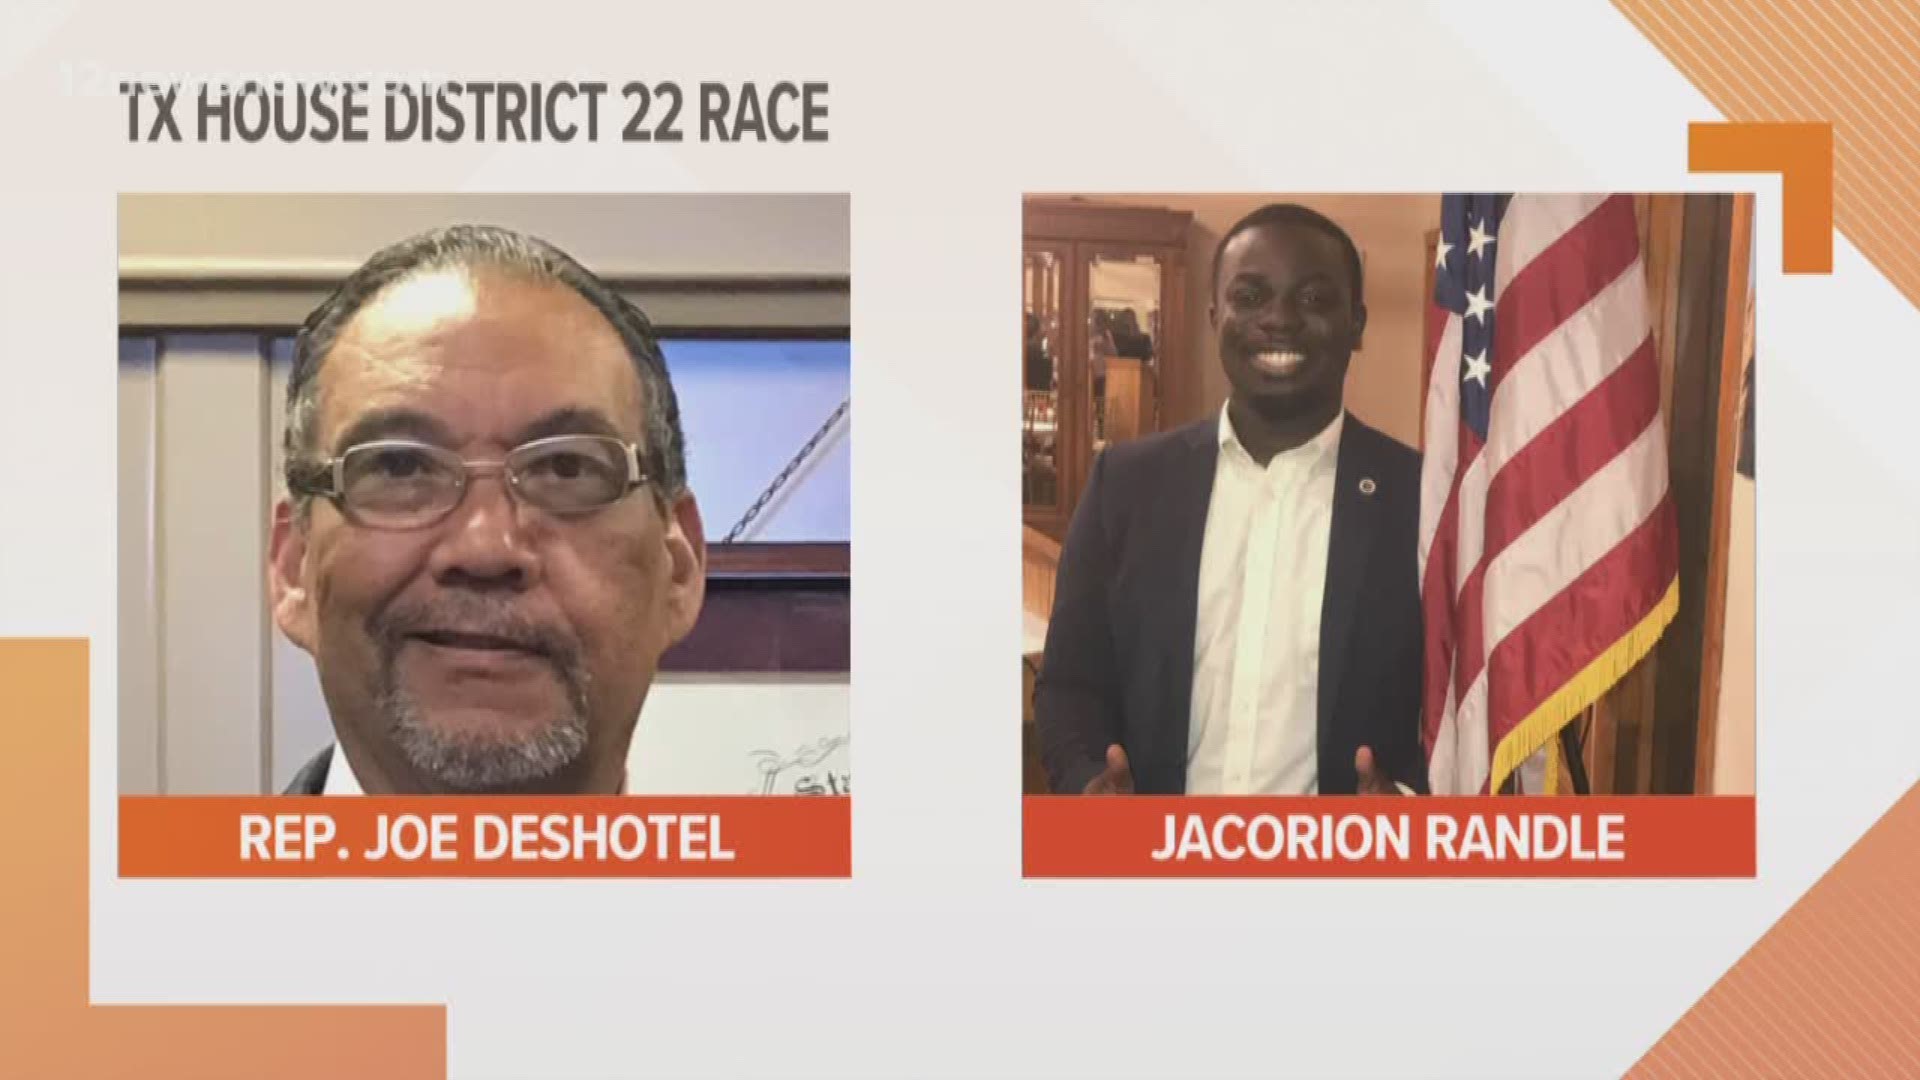 Jacorion Randle, 21,of Beaumont, announced his candidacy last night taking on longtime State Rep Joe Deshotel in the Texas House District 22 race in 2020.